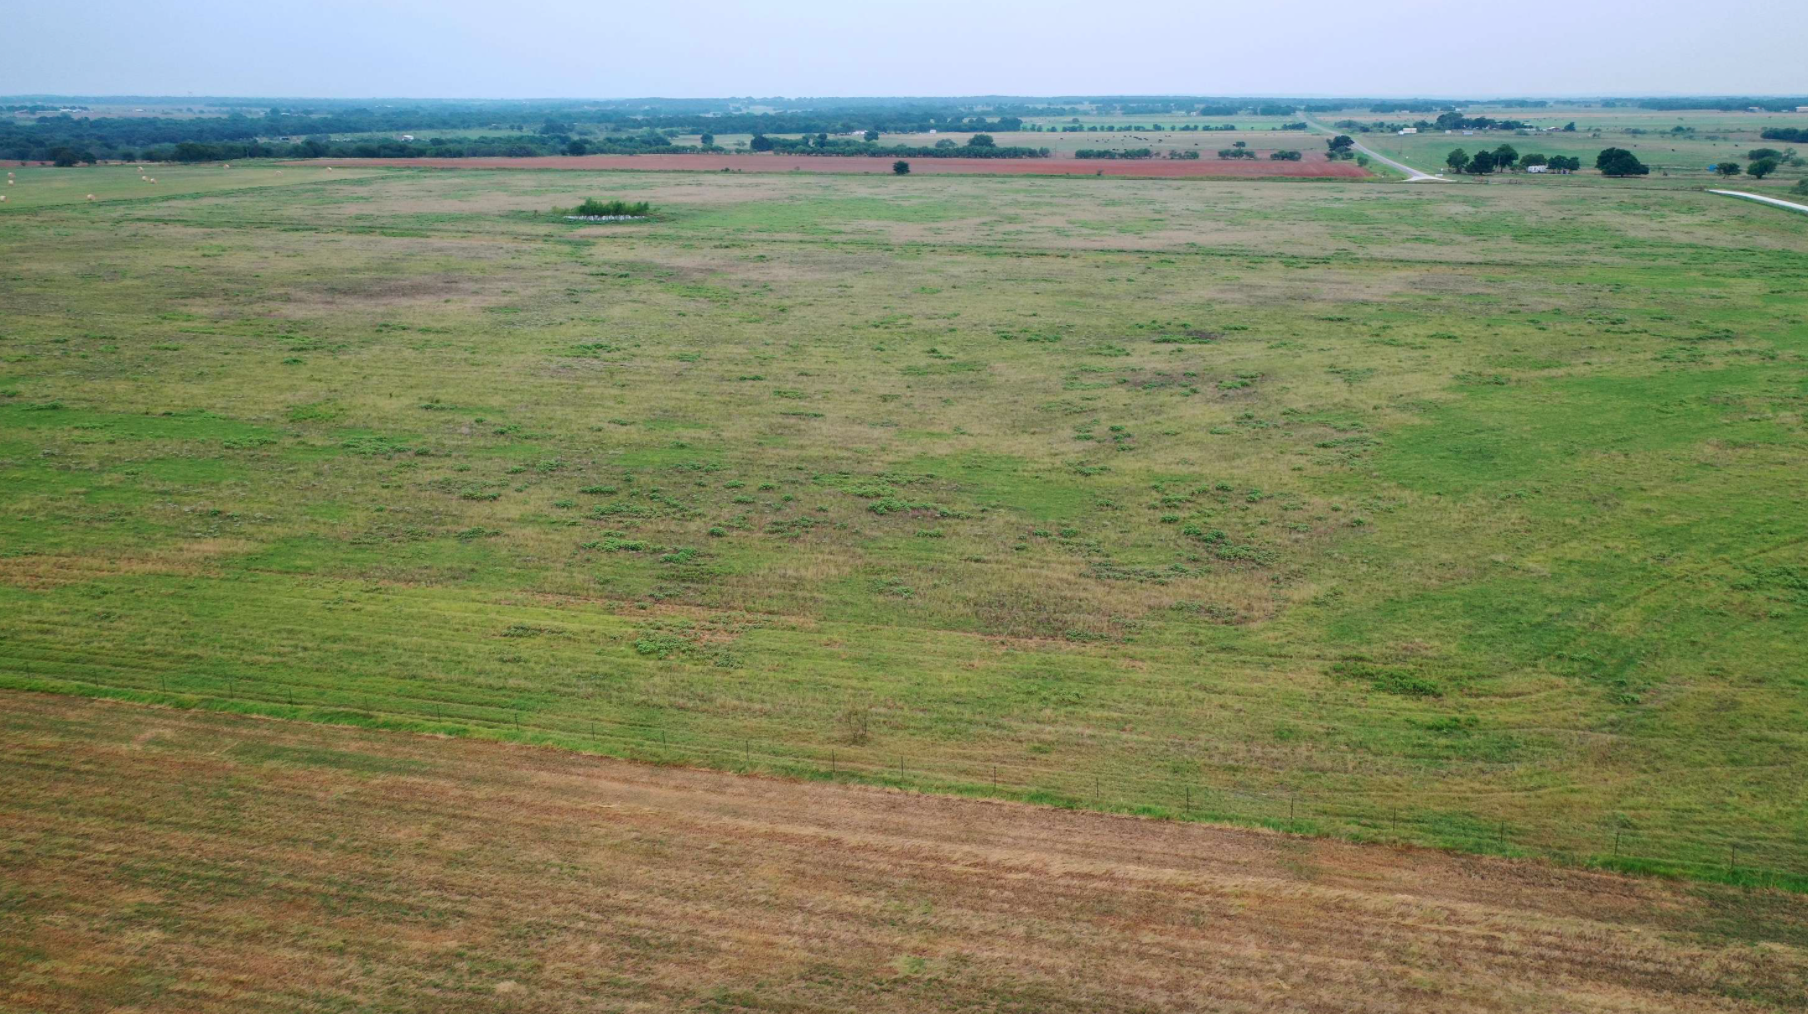 red-river-realty-gary-eldred-montague-county-nocona-texas-acres-development-new-home-builds-tract-landScreen Shot 2021-09-22 at 2.35.47 PM.png